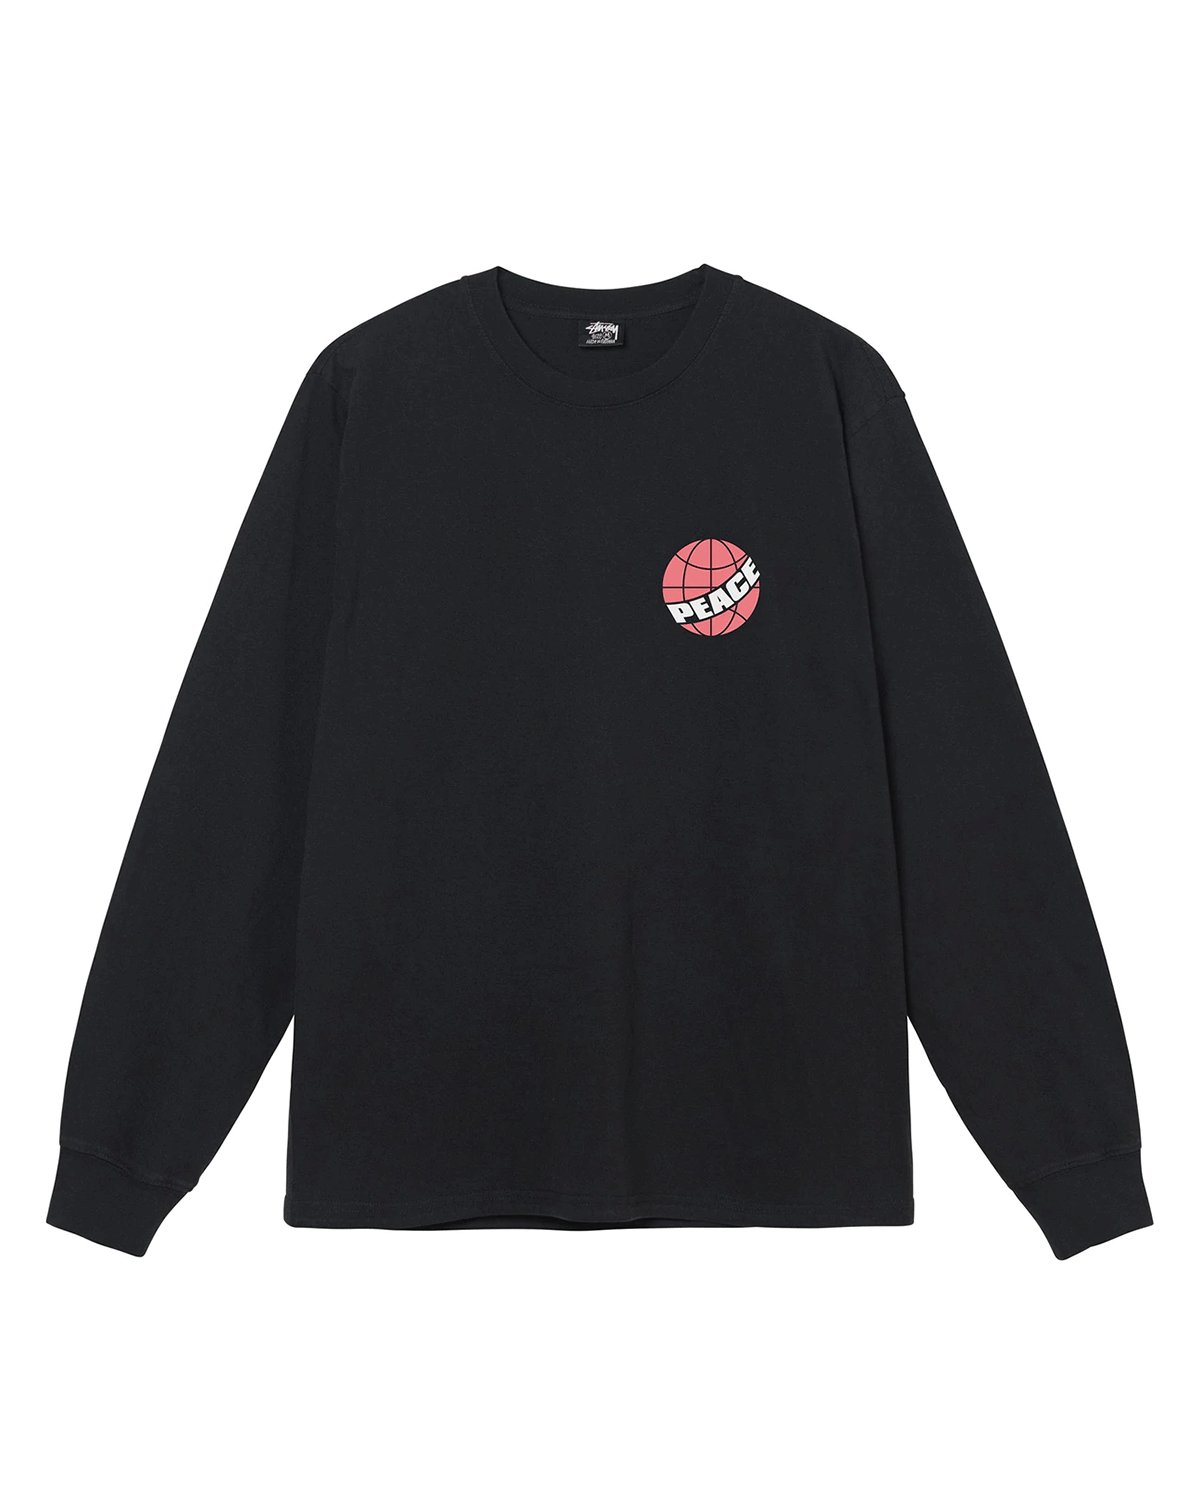 Global Peace Pigment Dyed LS Tee